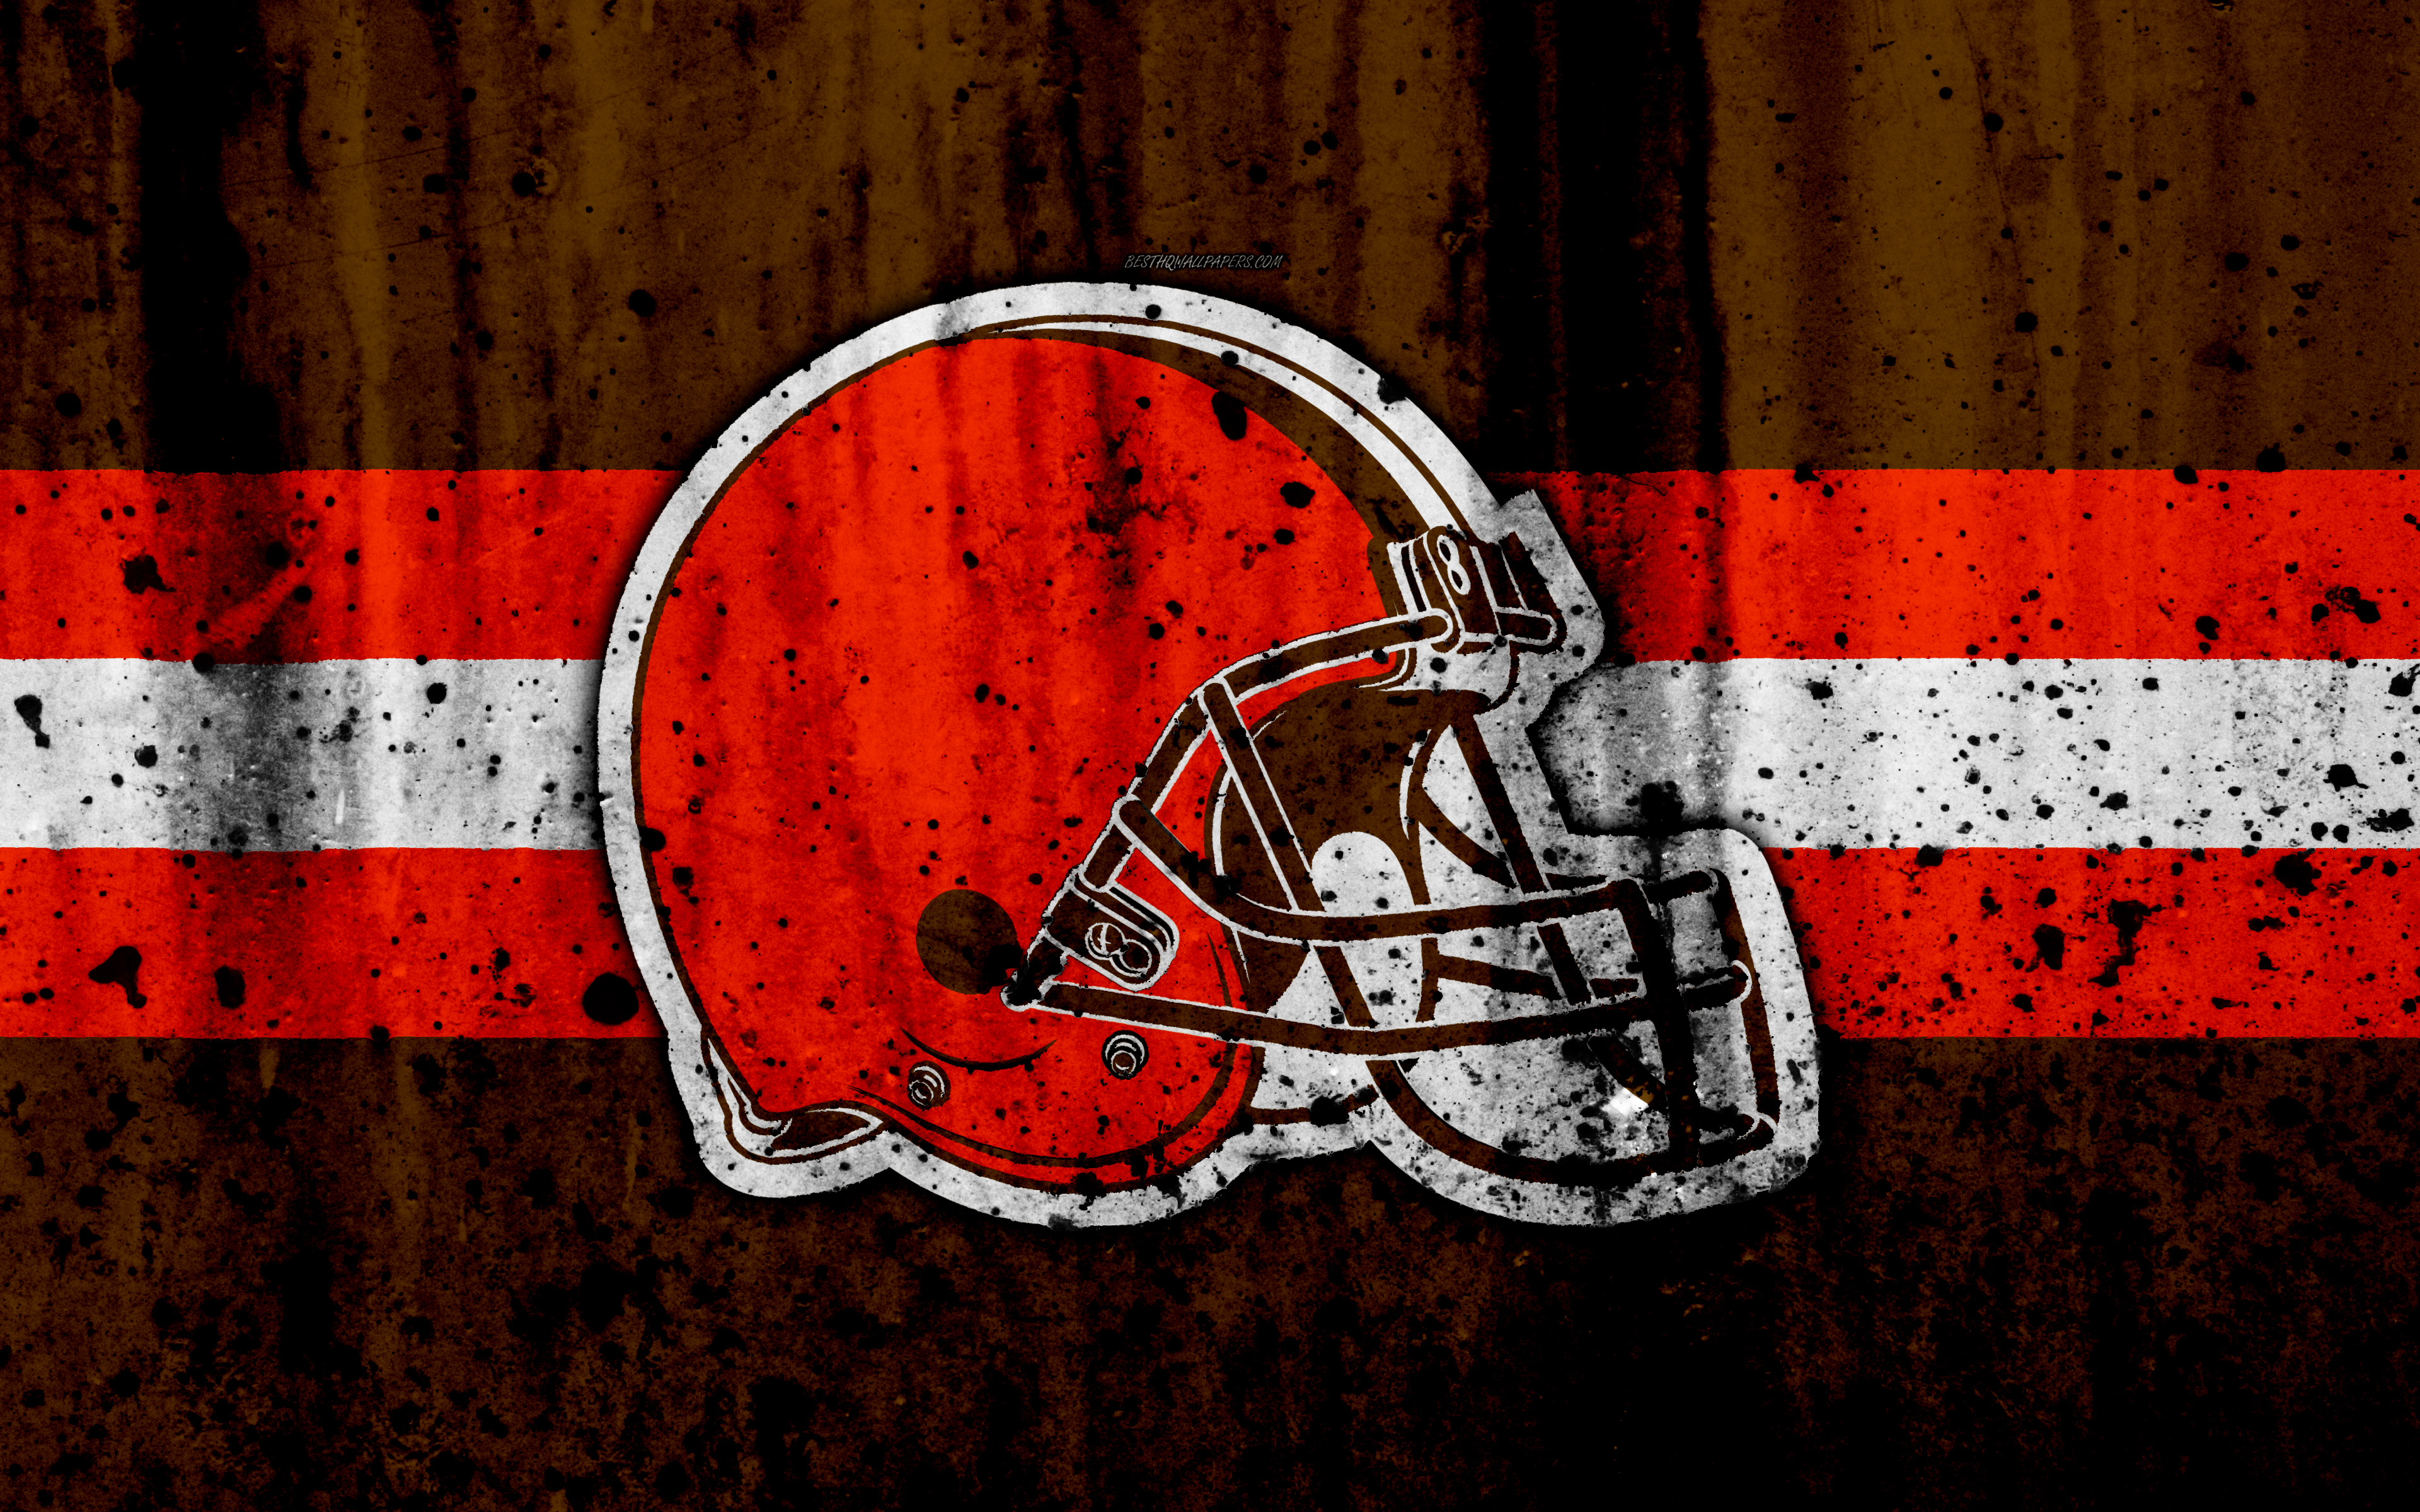 Download wallpapers cleveland browns k nfl grunge stone texture logo emblem cleveland ohio usa american football north division american football conference national football league for desktop with resolution x high quality hd